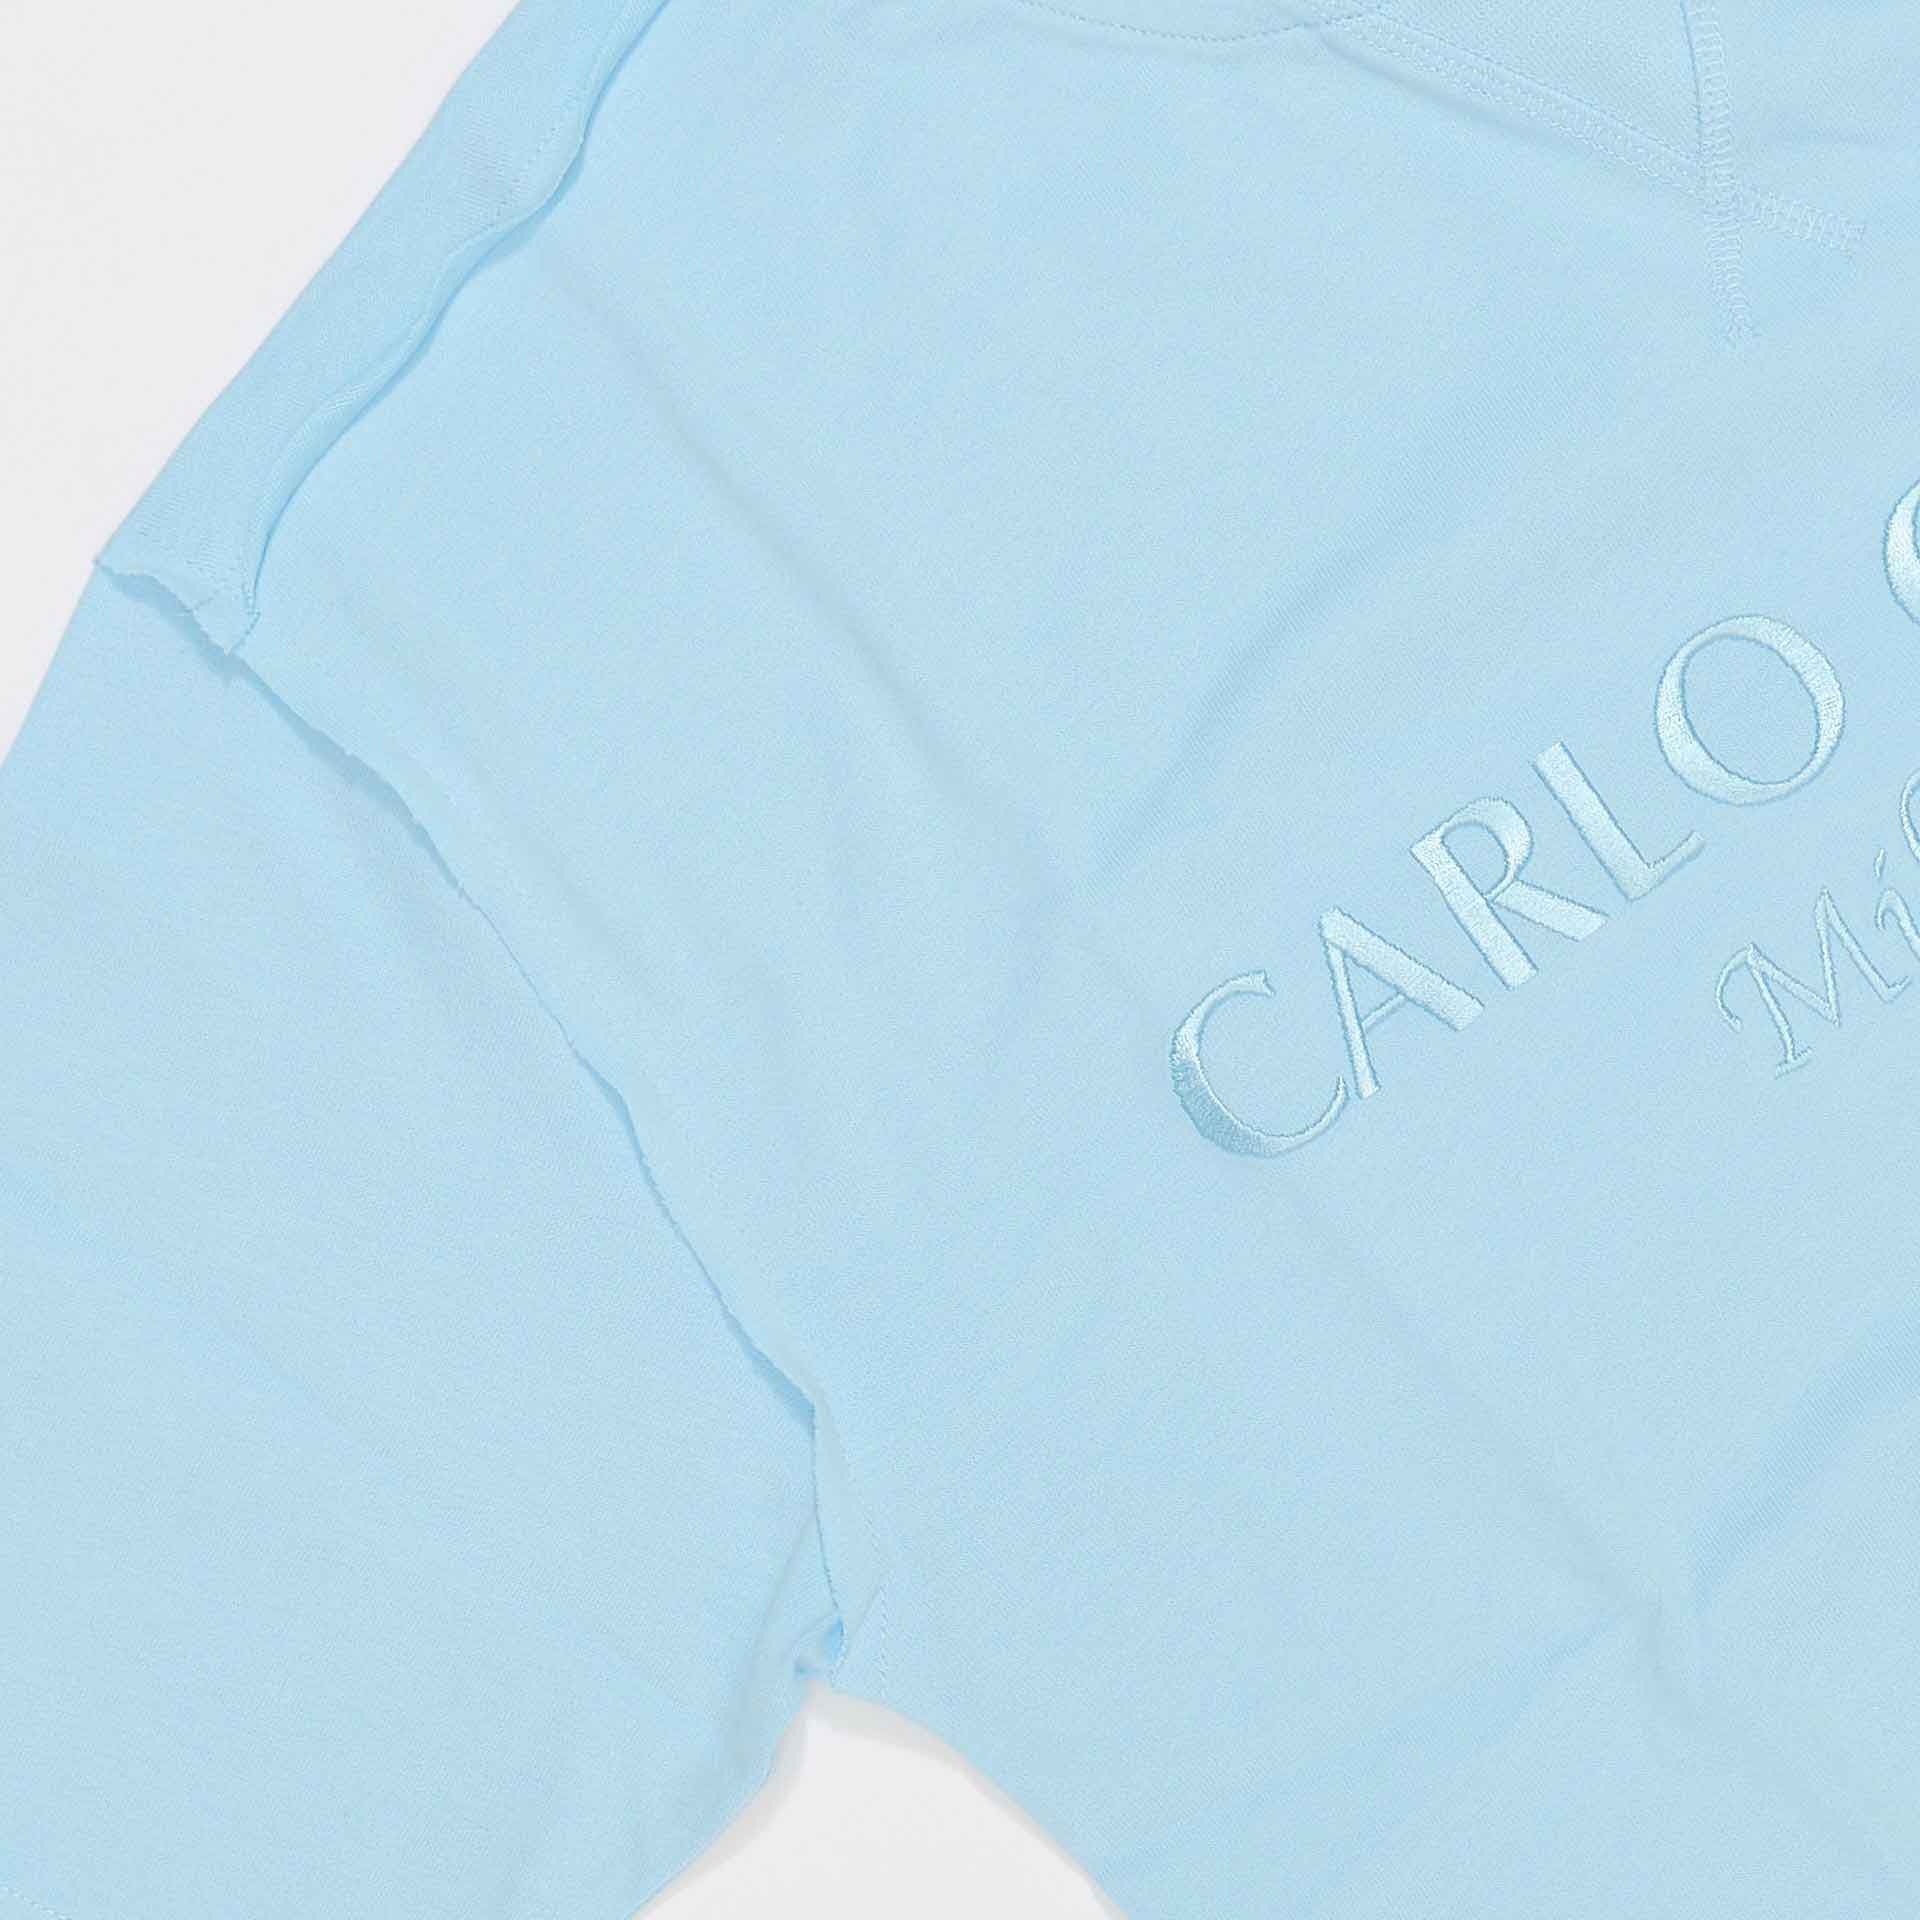 Carlo Colucci Oversize Fit T-Shirt Blue